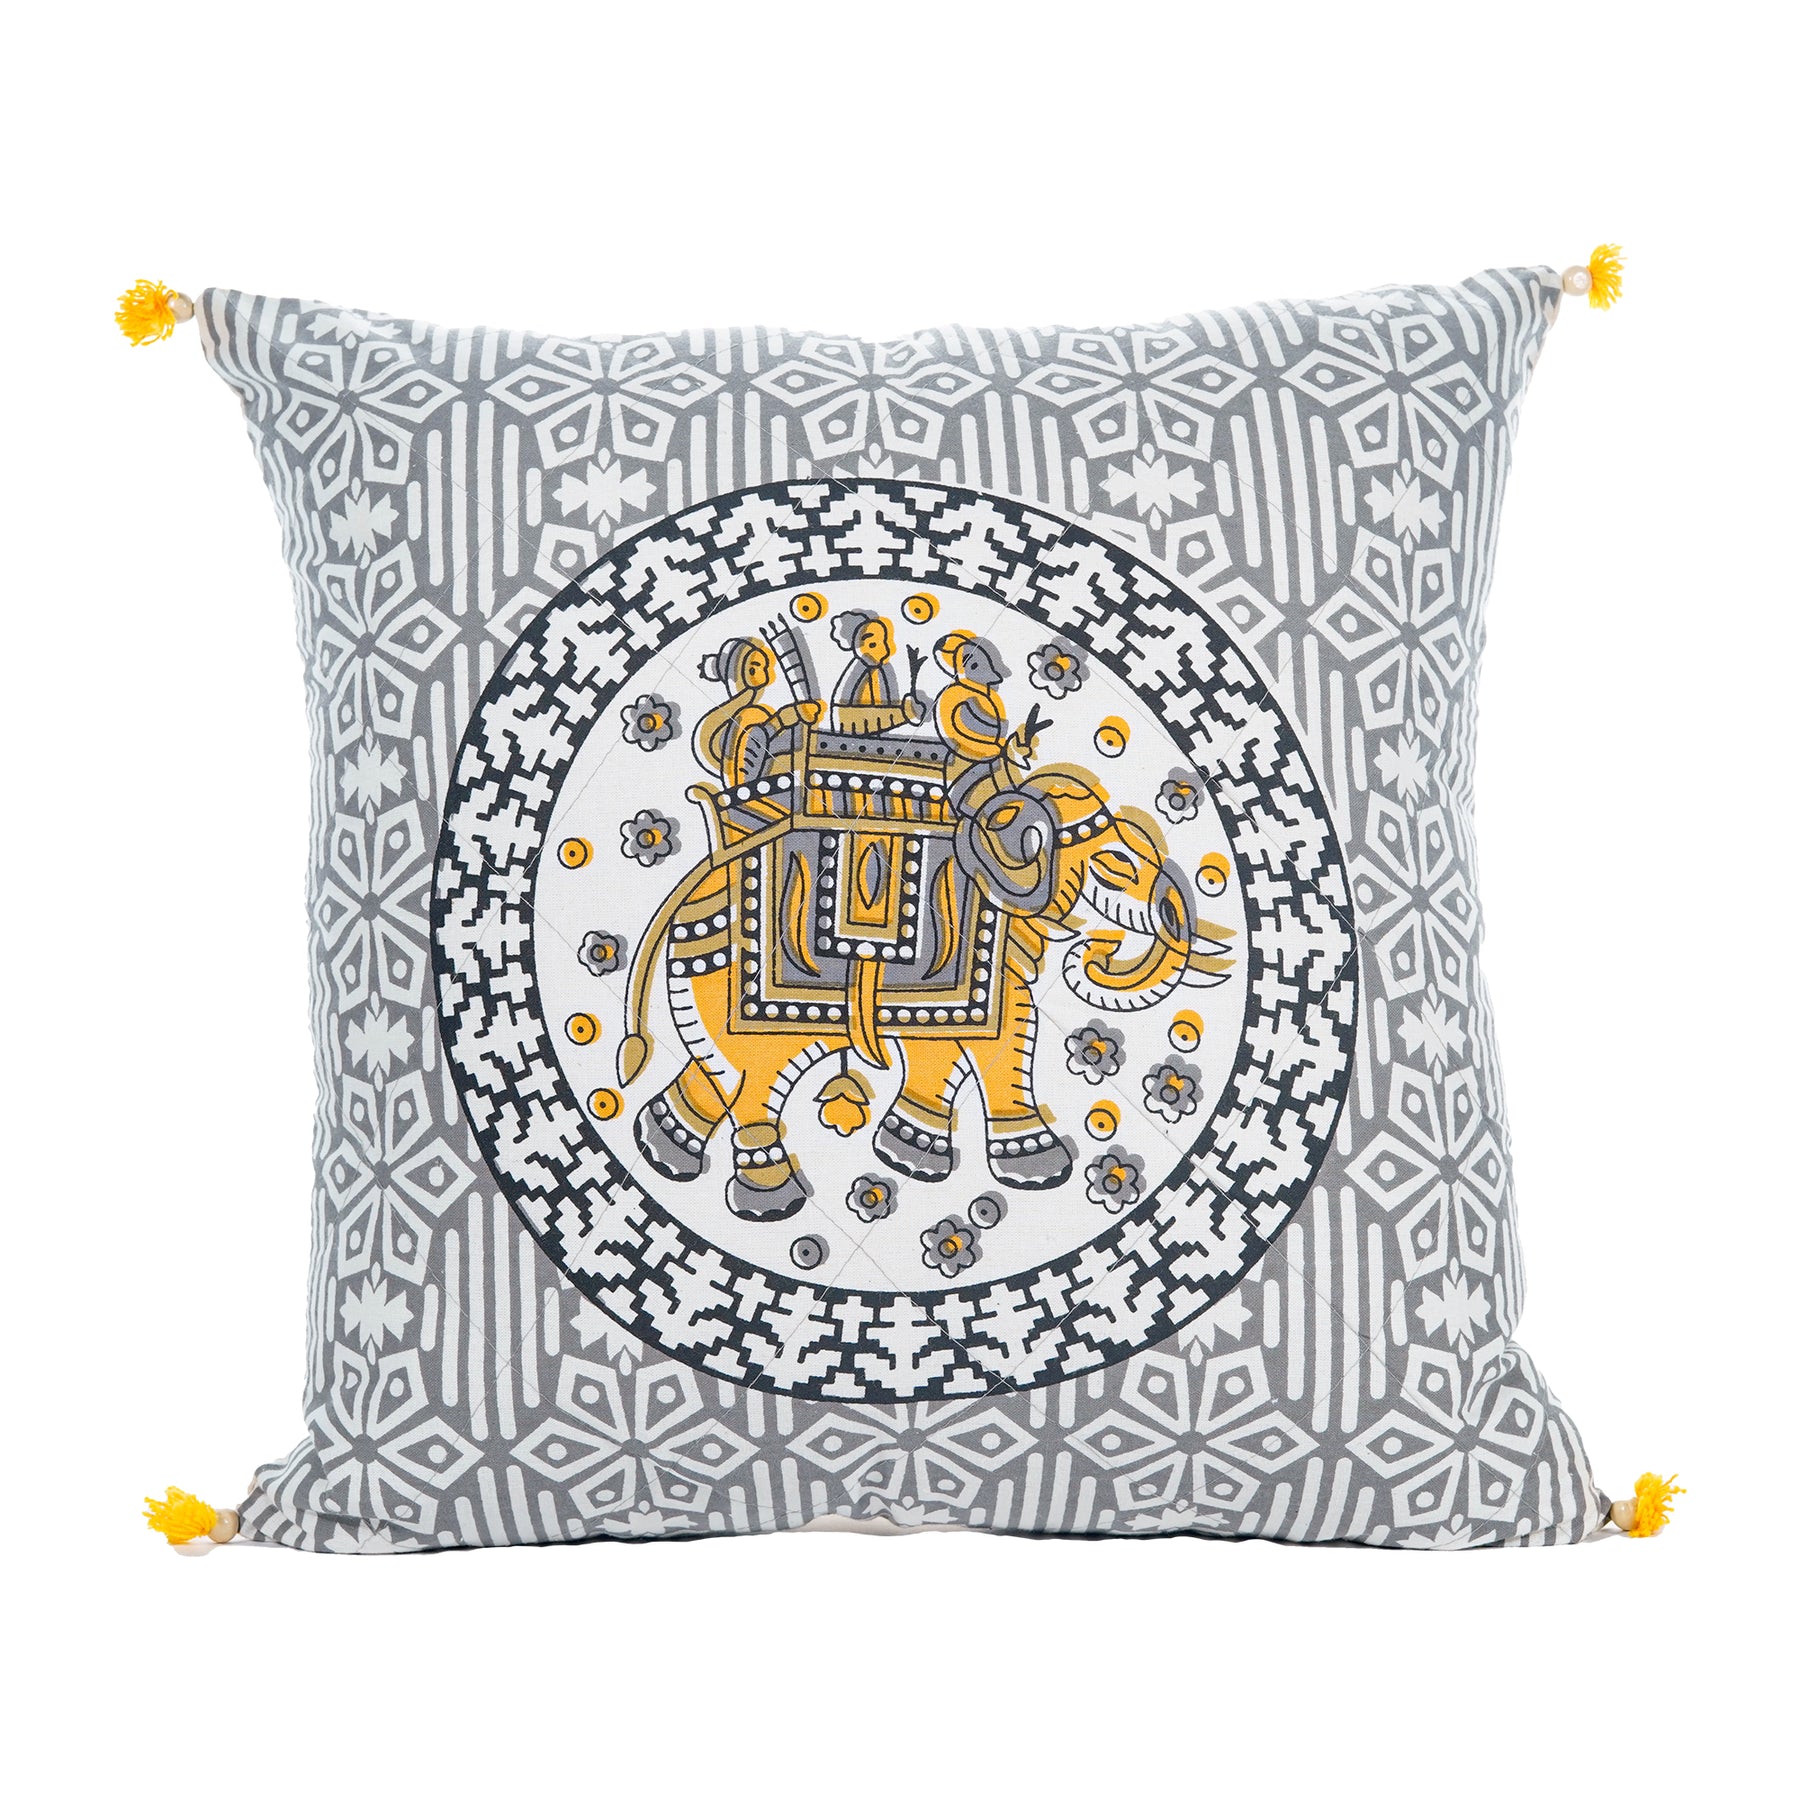 Inizio Jaipuri Hand Block Unique Traditional Print Cushions Covers with Zip Closer Luxurious Colorful Ethnic Decorative Cotton Square Pillow Cover for Sofa & Home Decoration